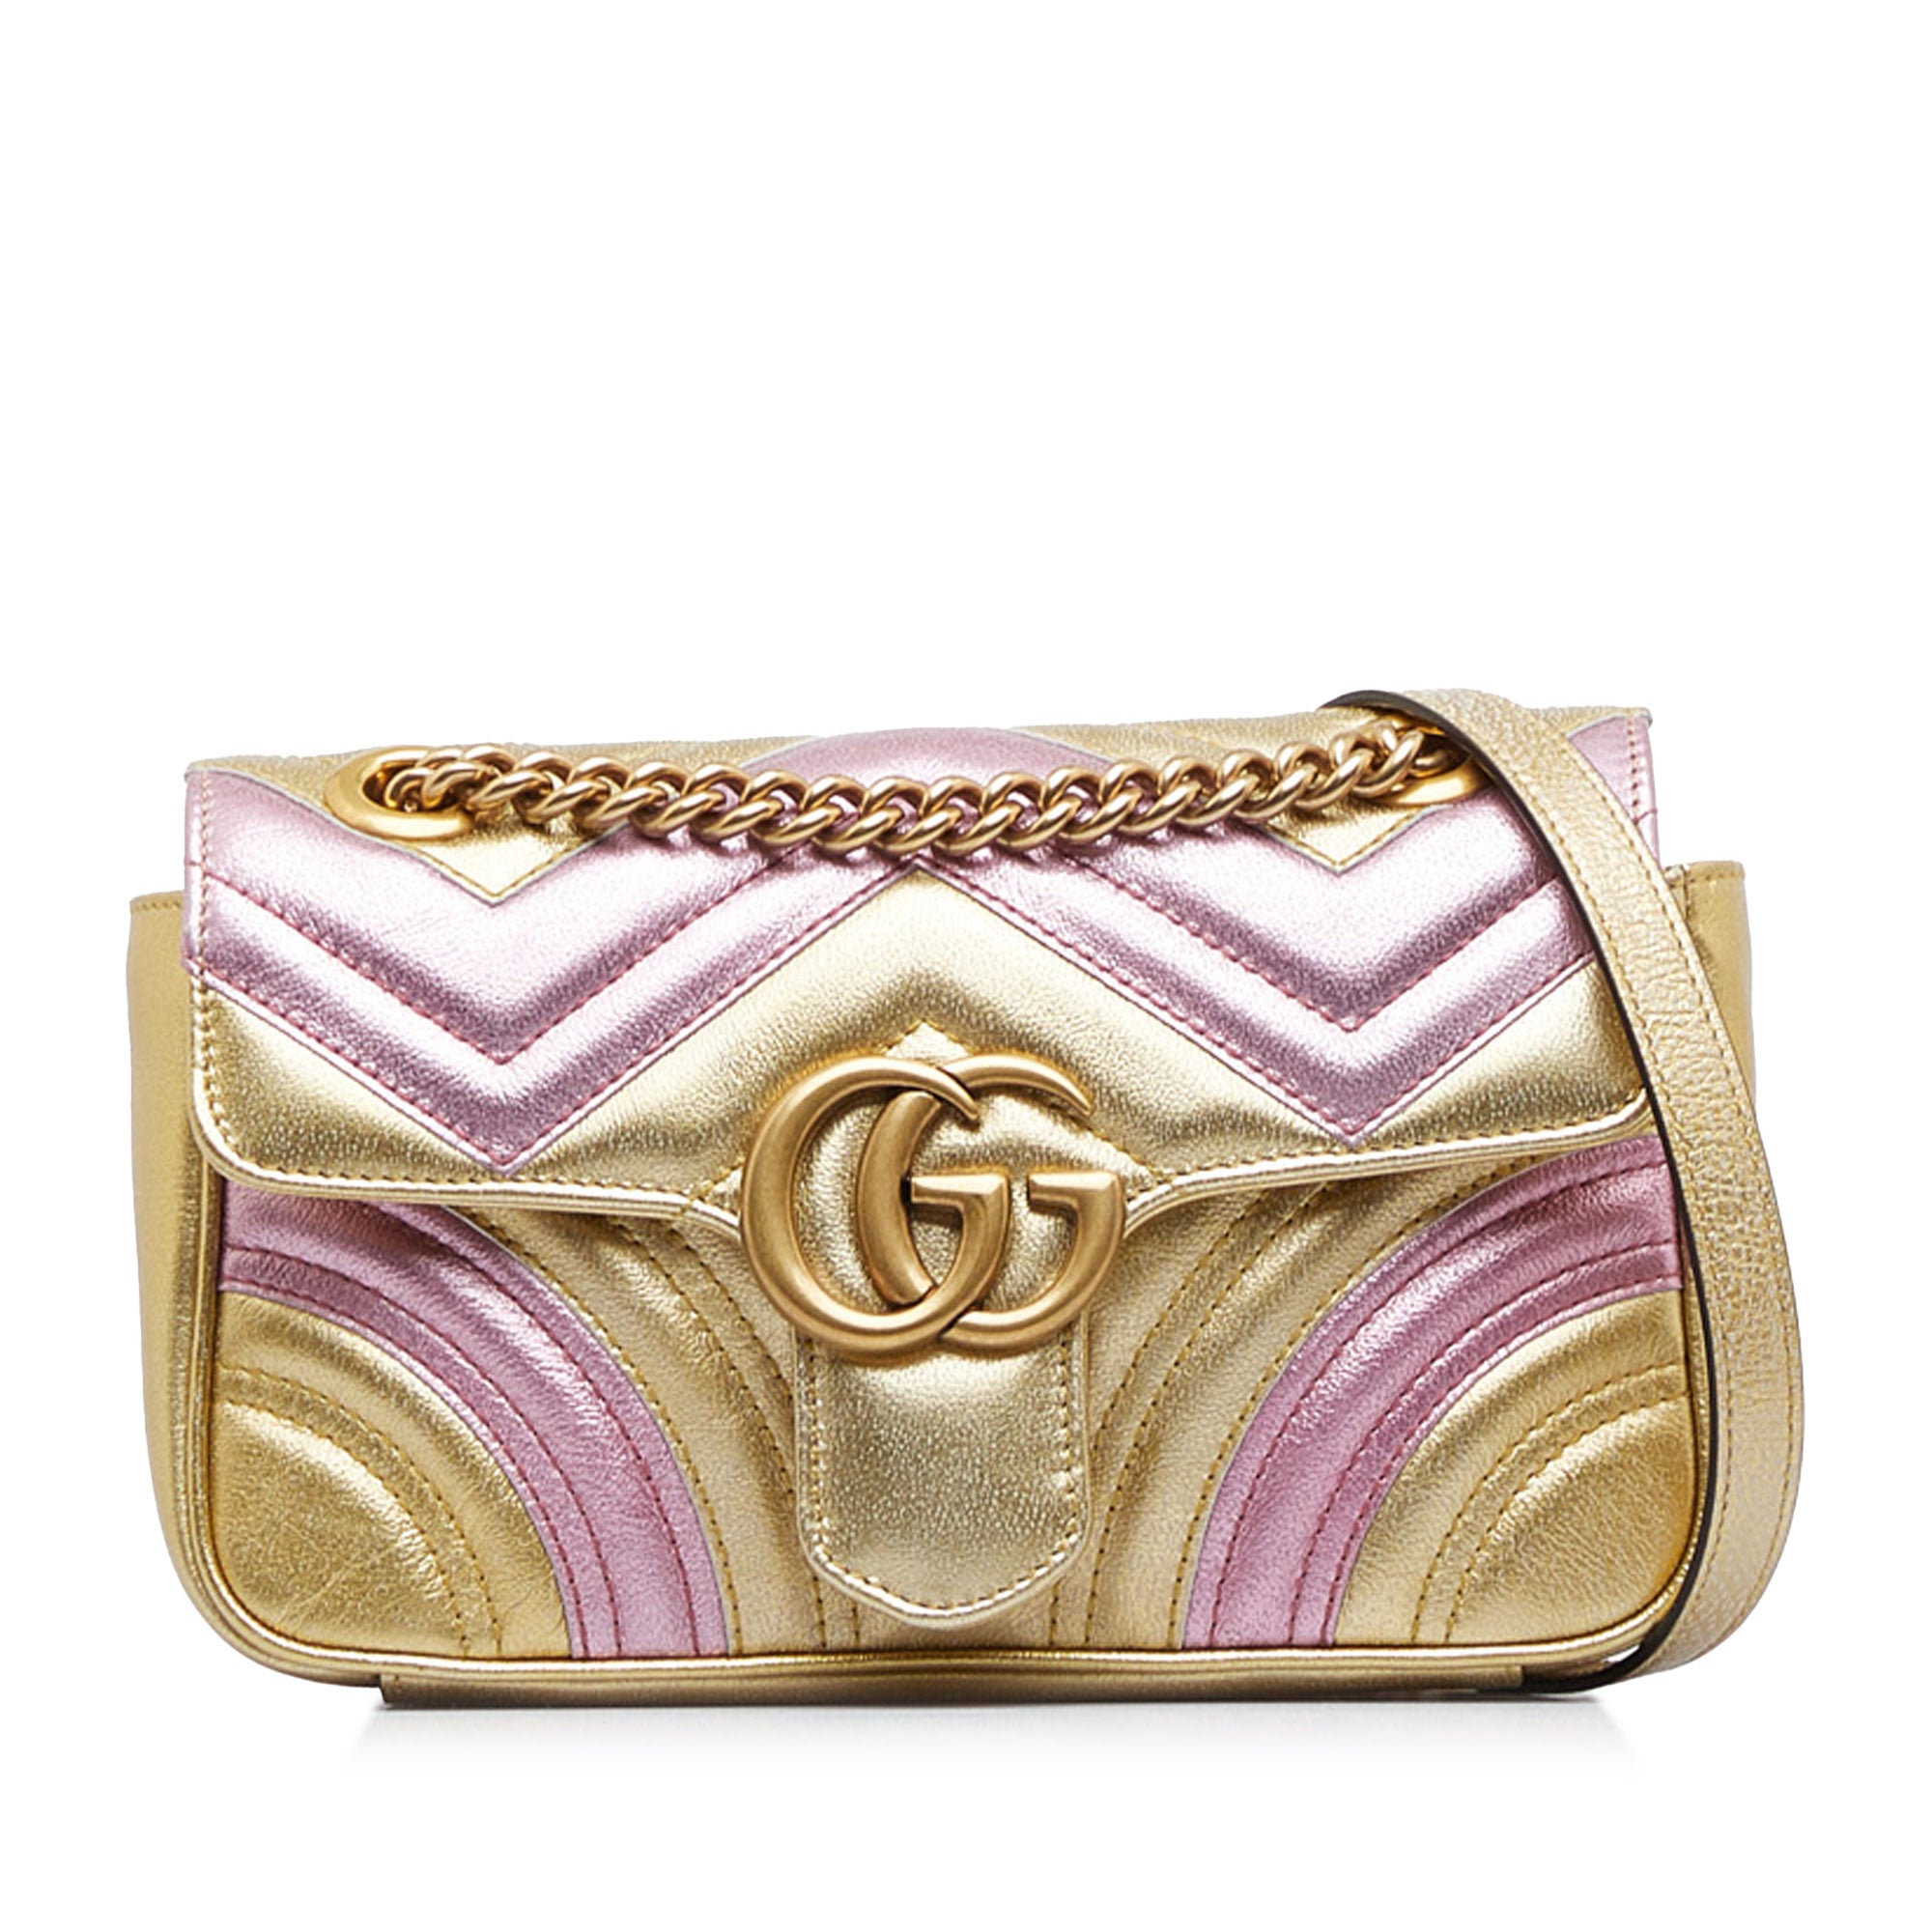 Gucci Marmont GG Gold Buckle Leather Crossbody Bag